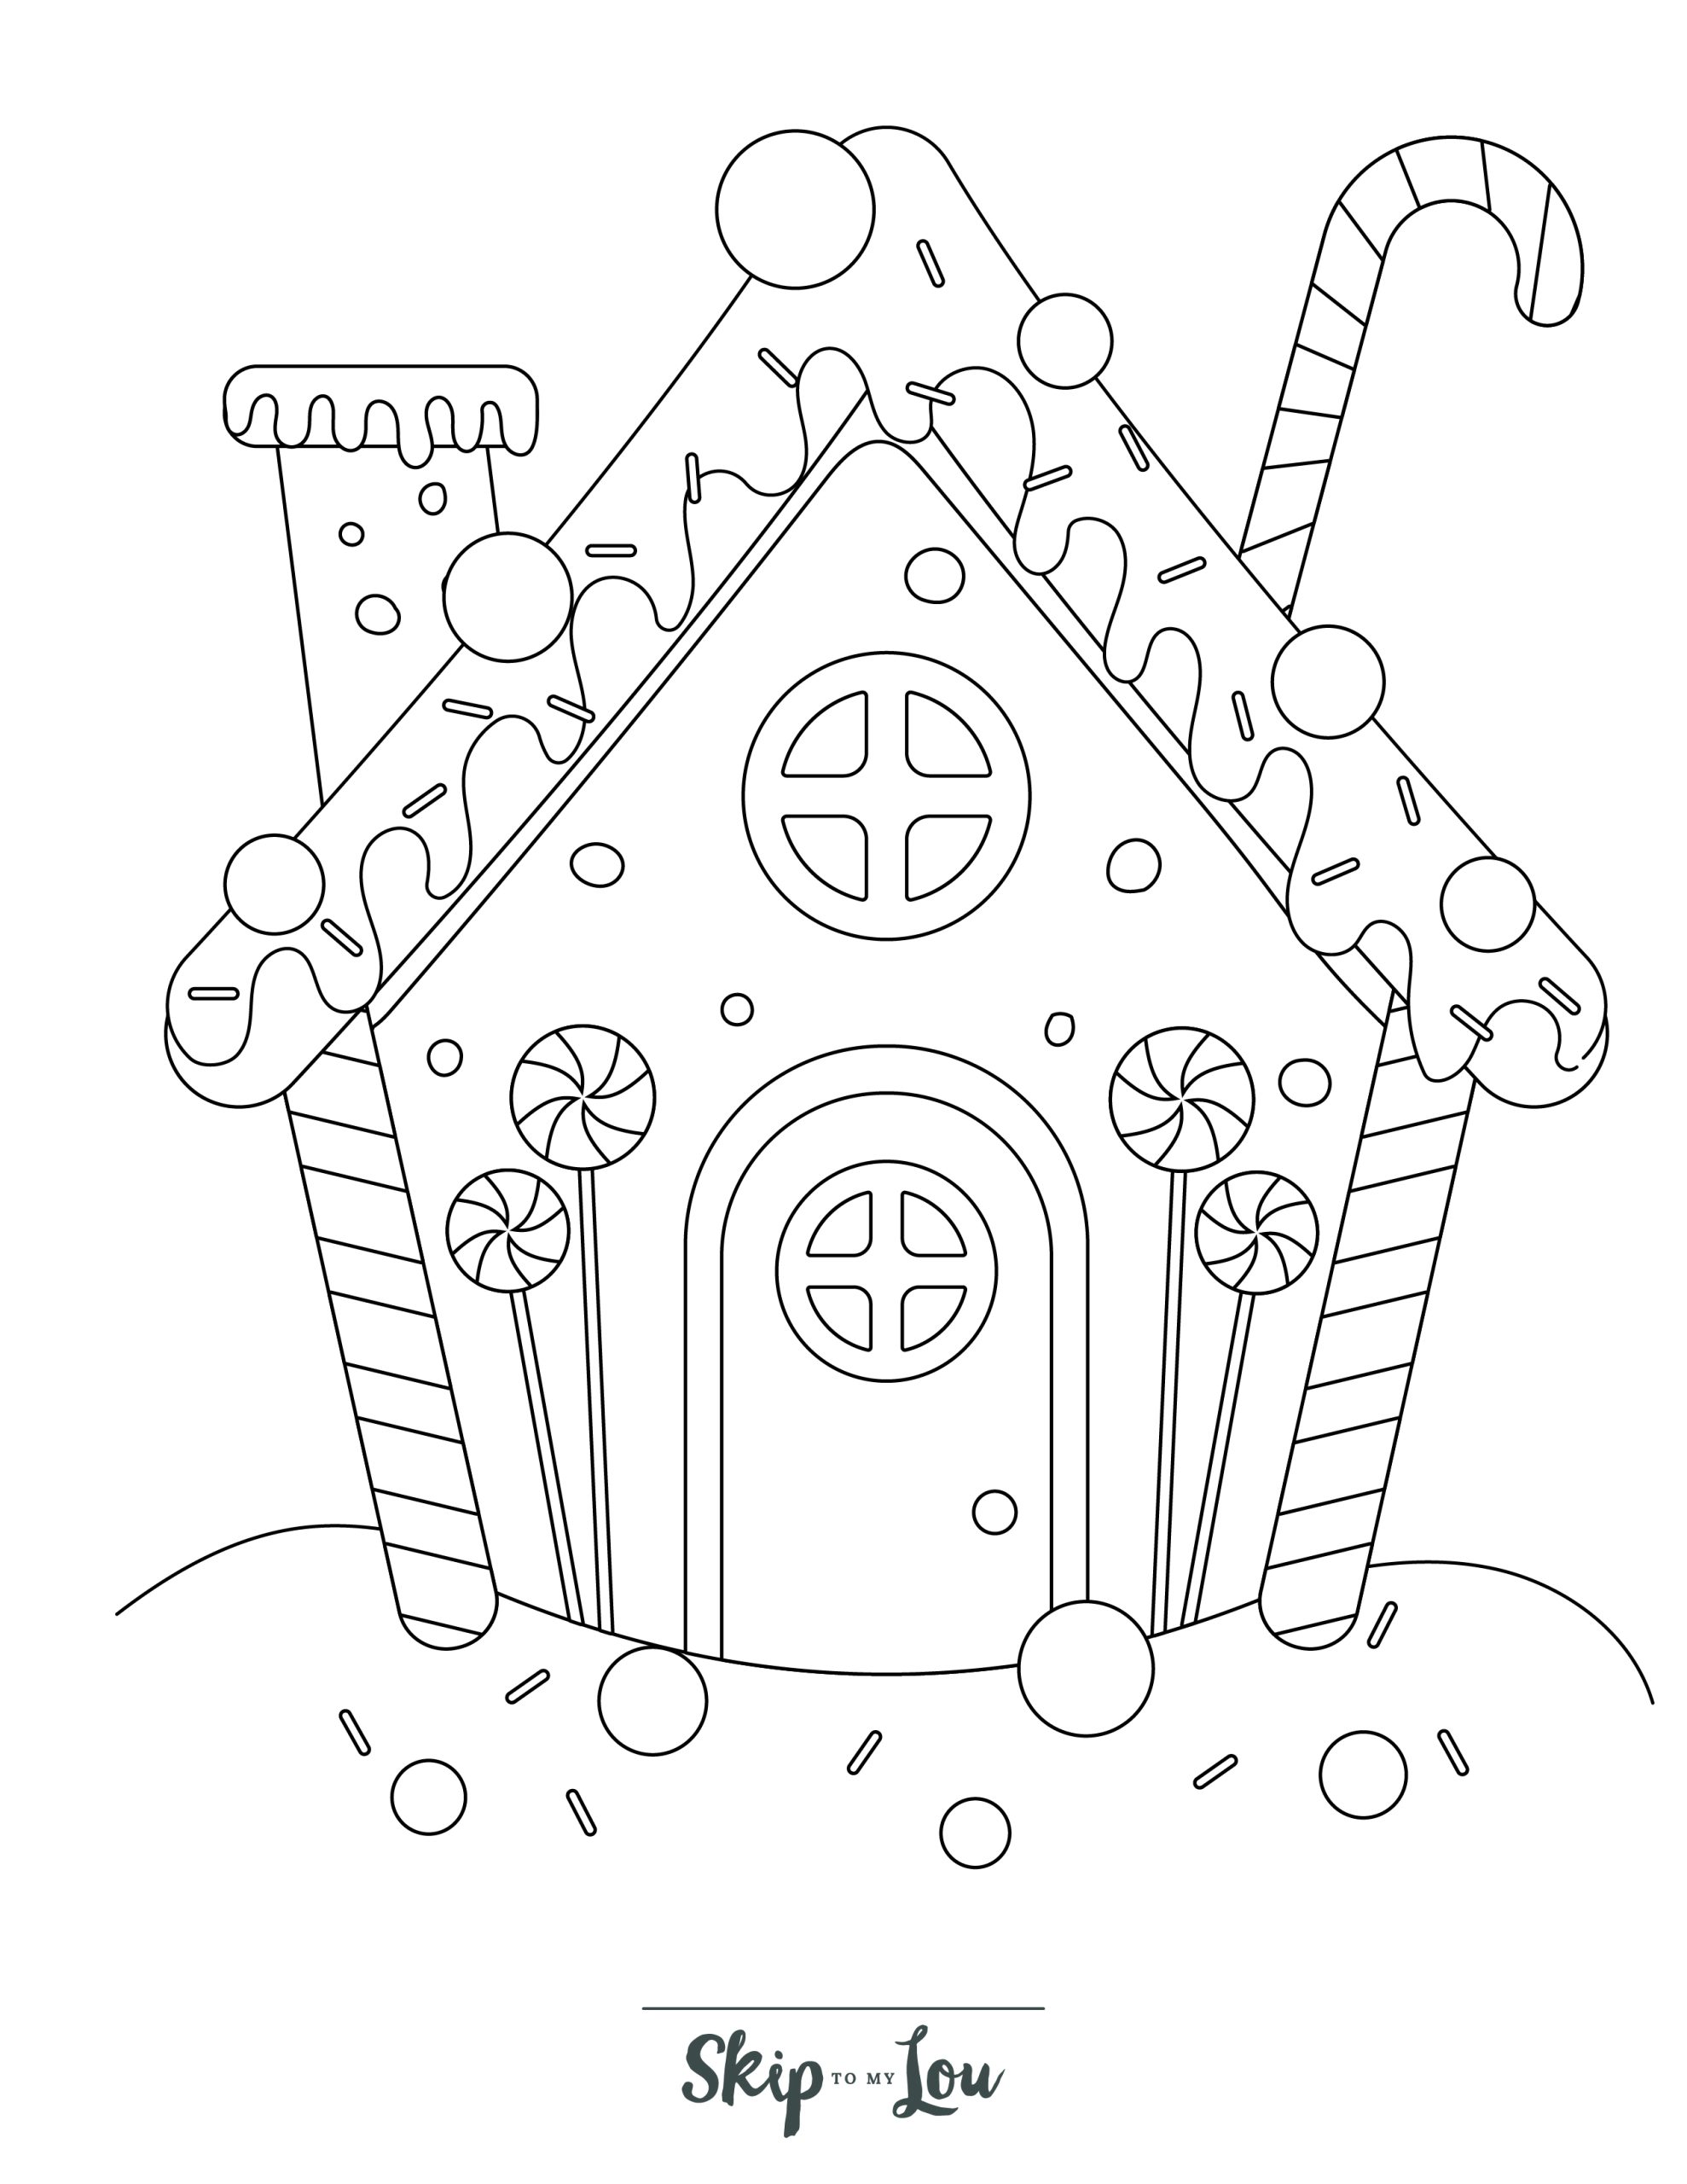 Holiday Coloring Page 9 - Line drawing of a gingerbread house 